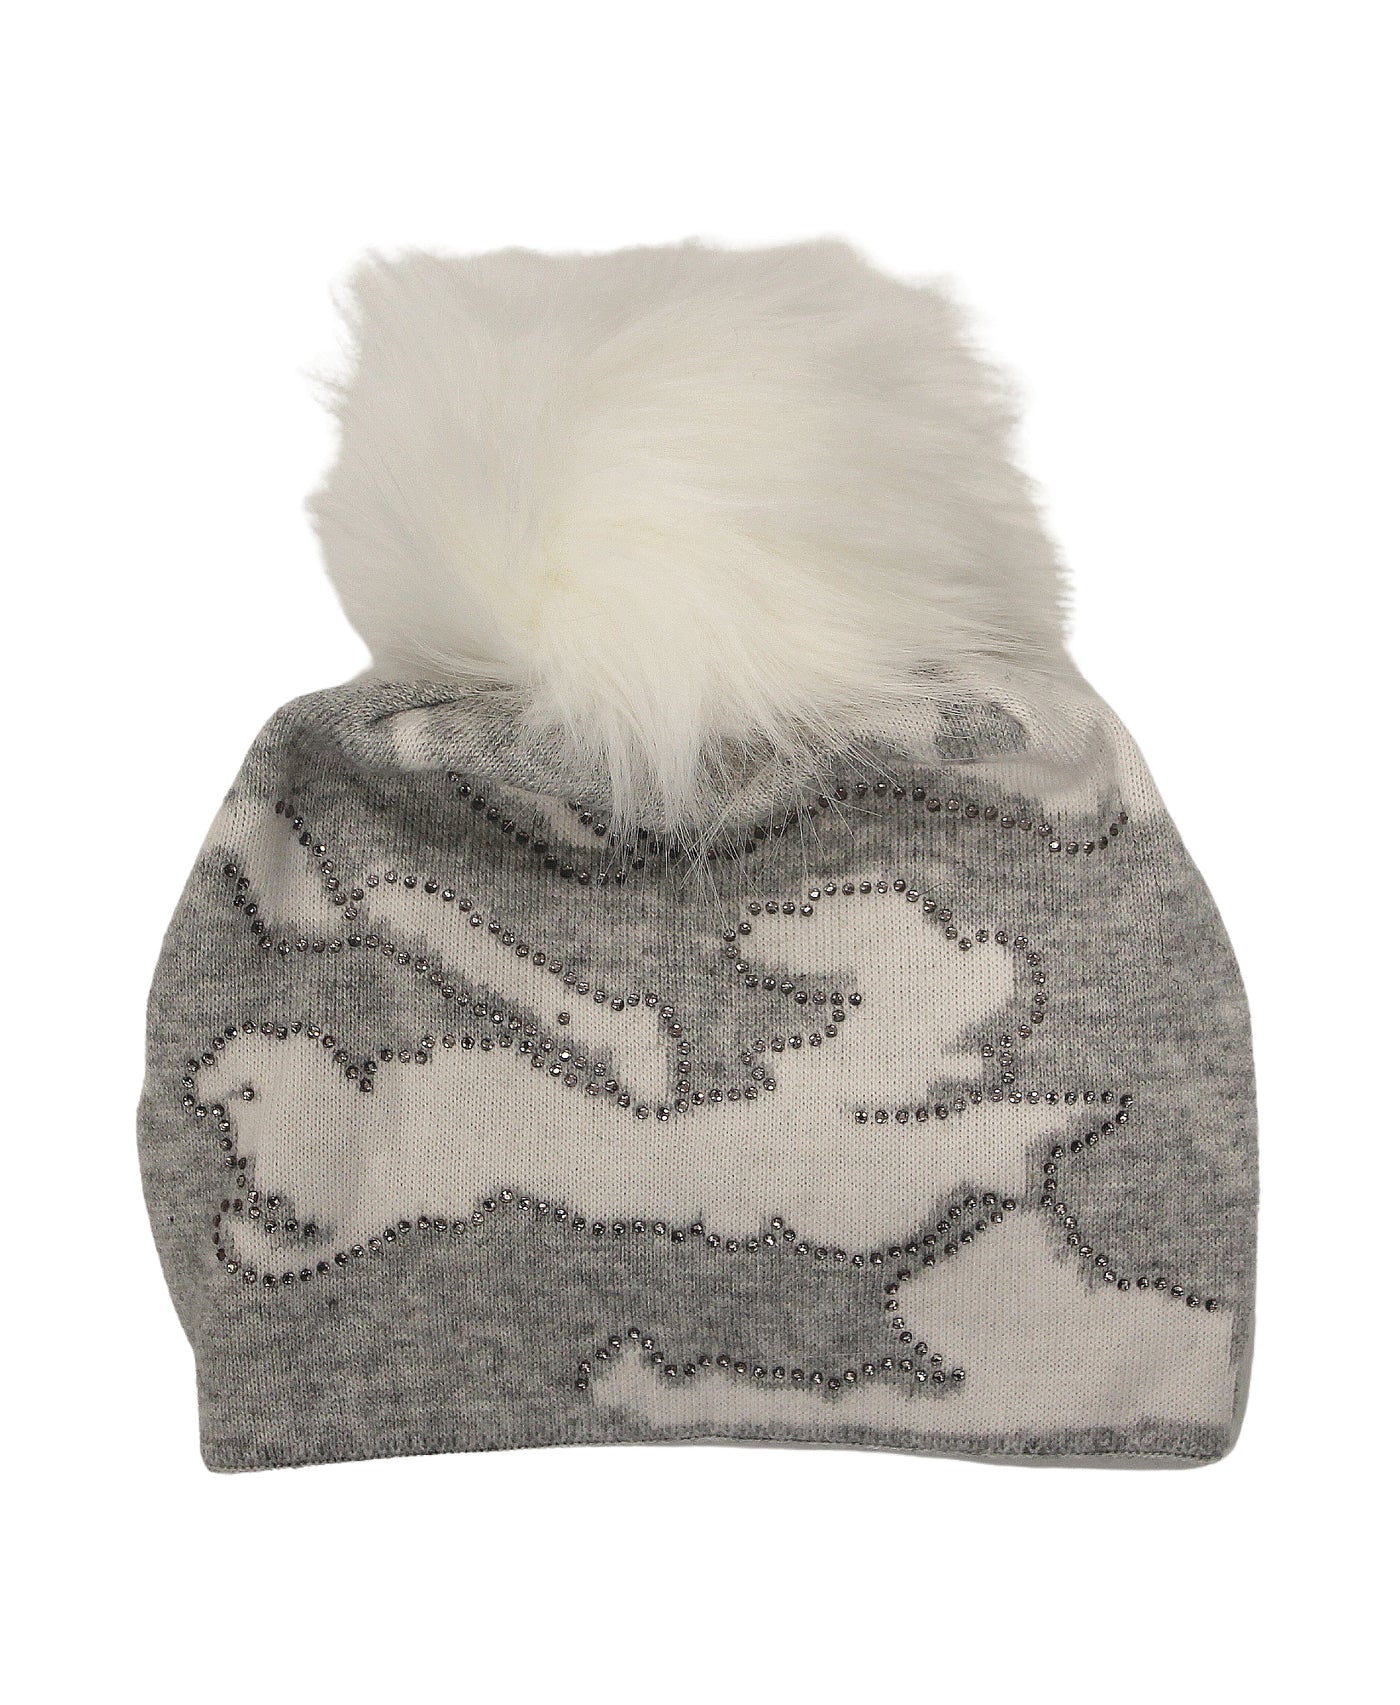 Camo Knit Slouch Hat w/ Crystals & Faux Fur Pom image 1